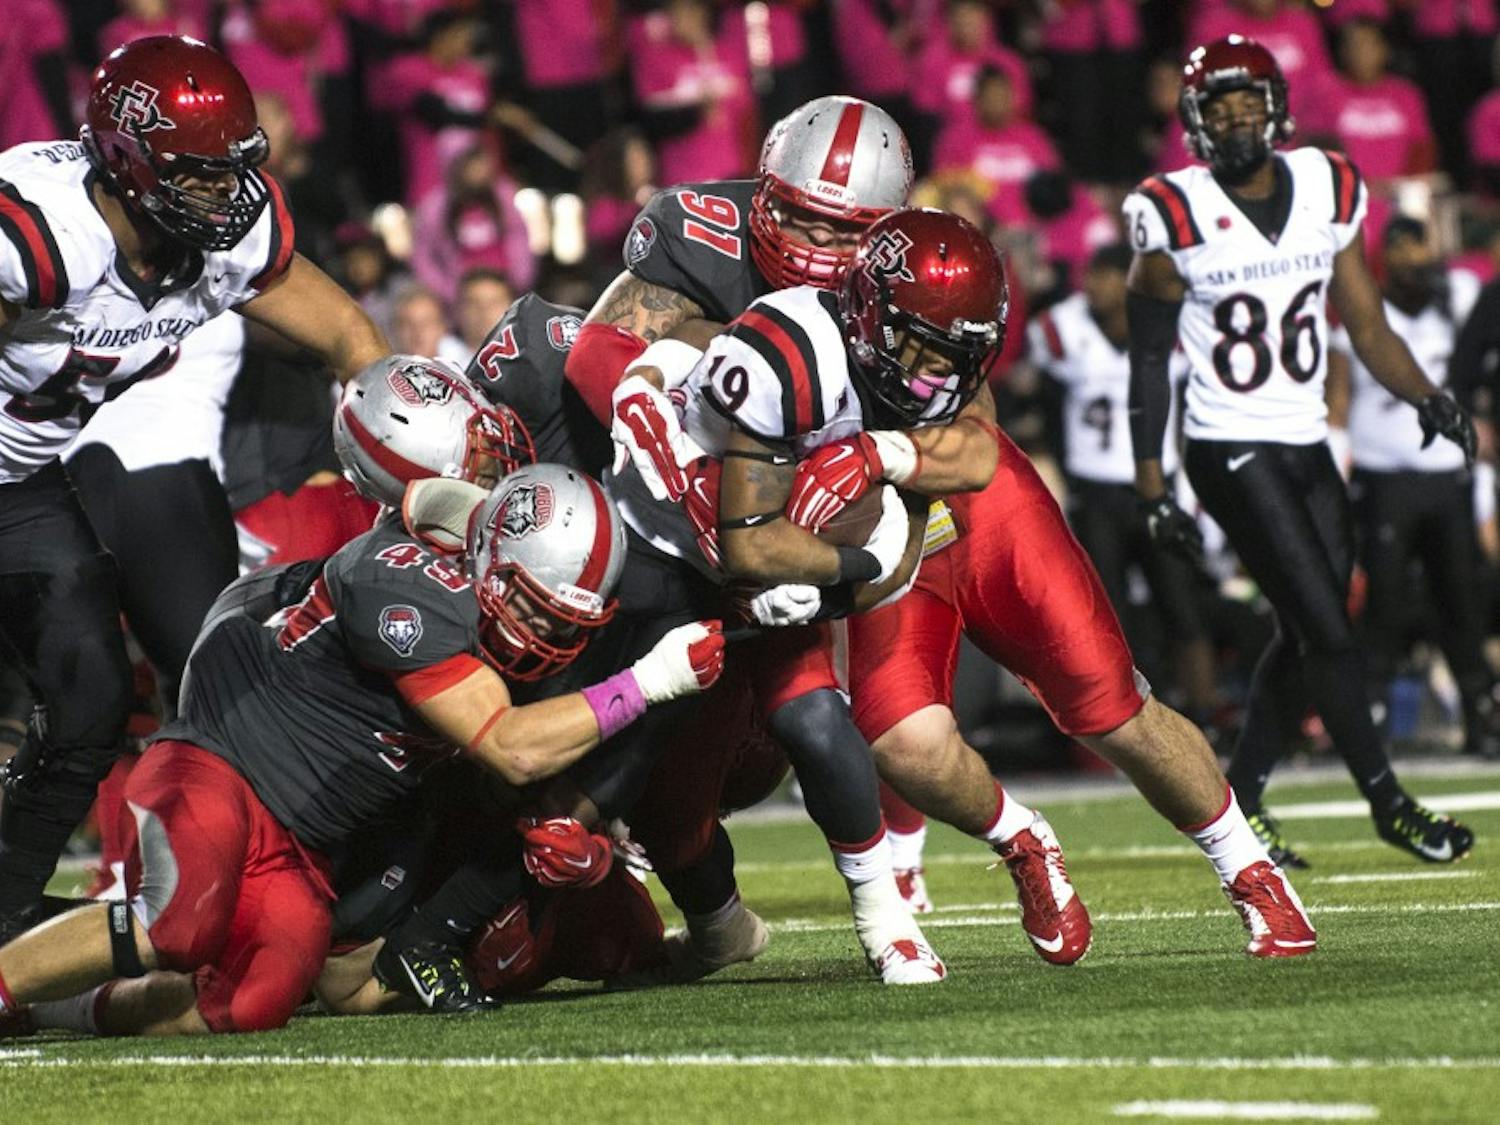 Three New Mexico defensive linemen tackle San Diego State running back Donnel Pumphrey during the Oct. 10 game. The Lobos, who have struggled to win Mountain West games in recent years, resumes conference play Saturday at UNLV.